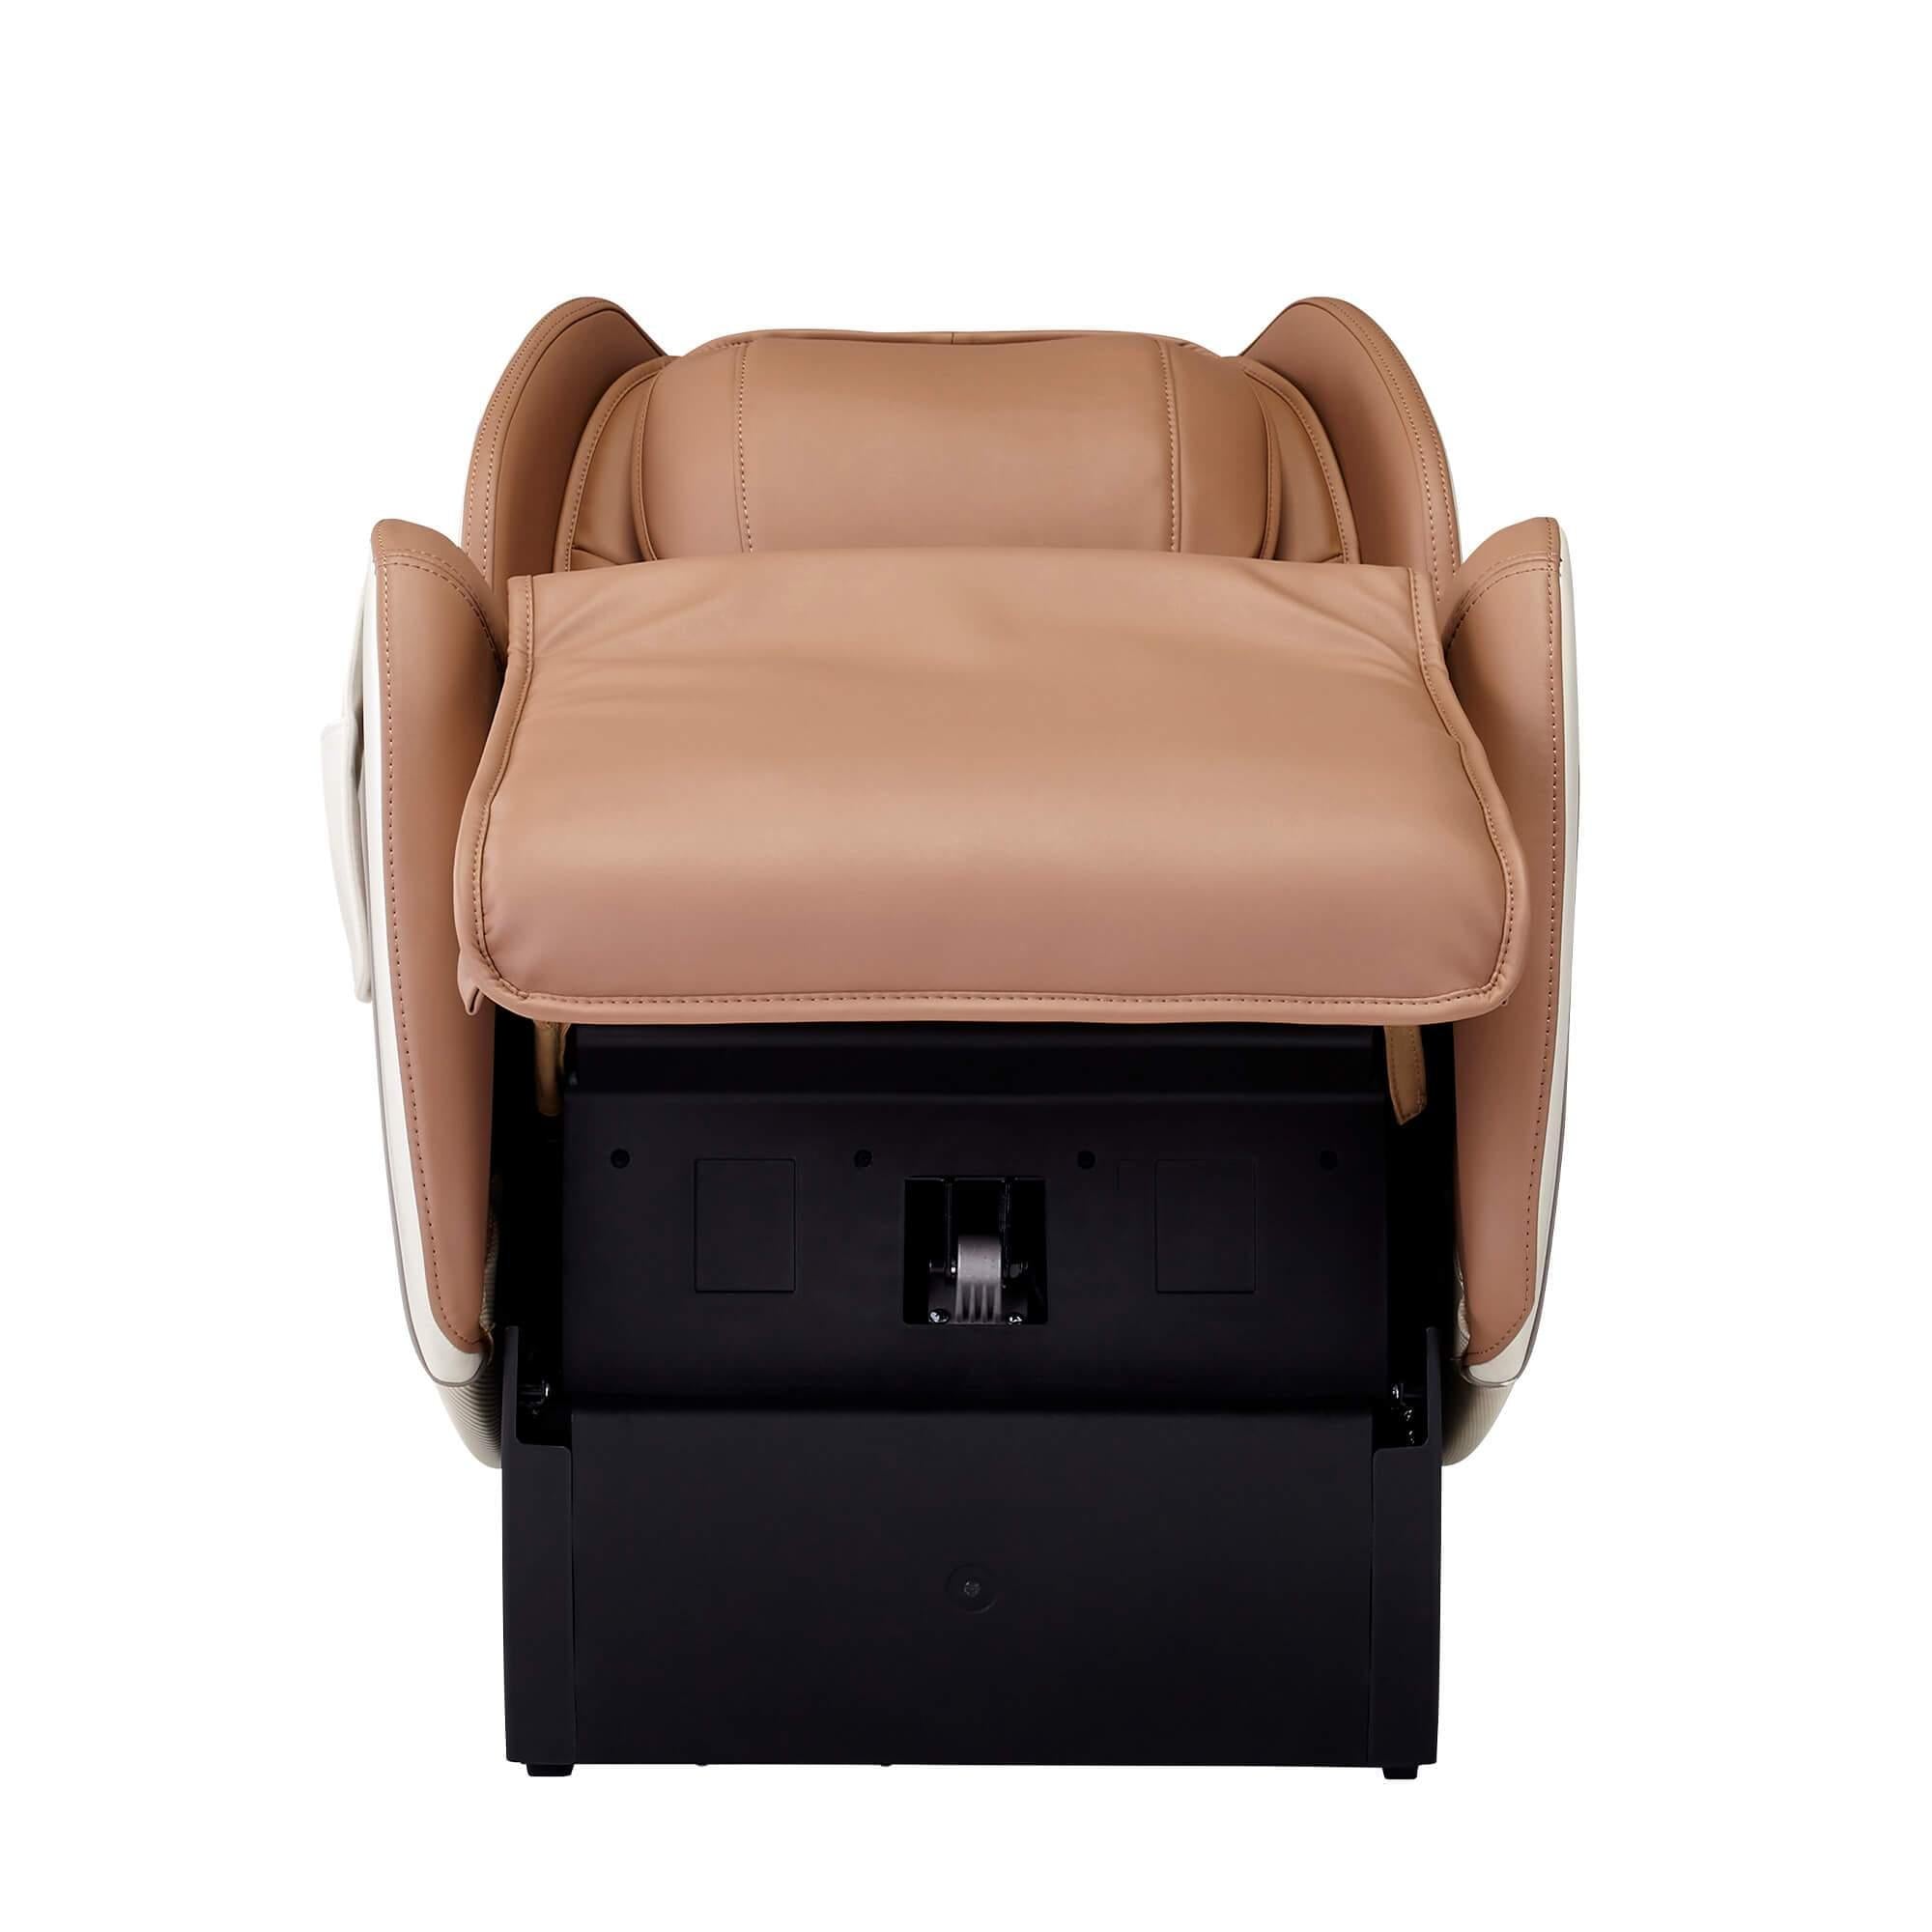 Synca CirC Plus Massage Chair - Unmatched Comfort and Style – ZEBRA MASSAGE  CHAIRS